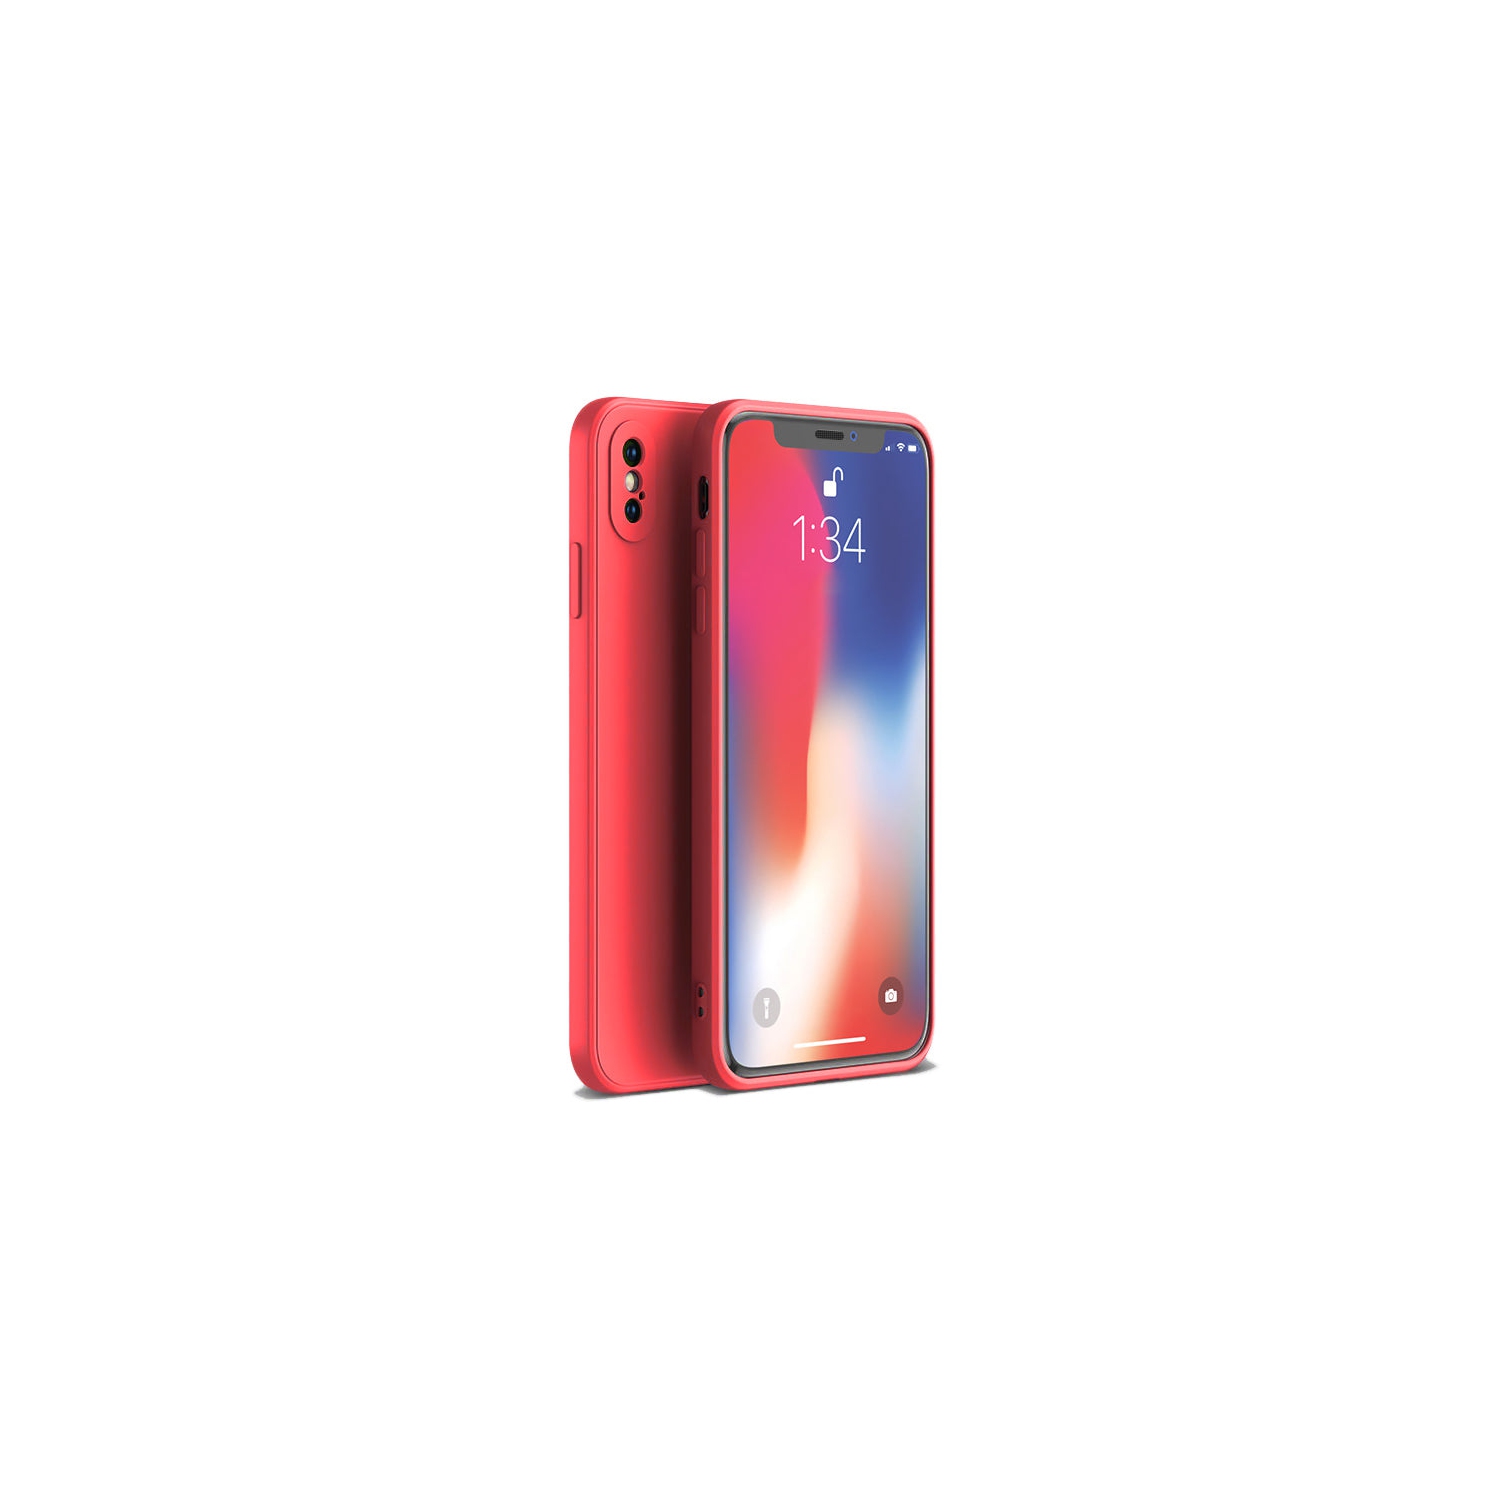 PANDACO Soft Shell Matte Red Case for iPhone XS Max